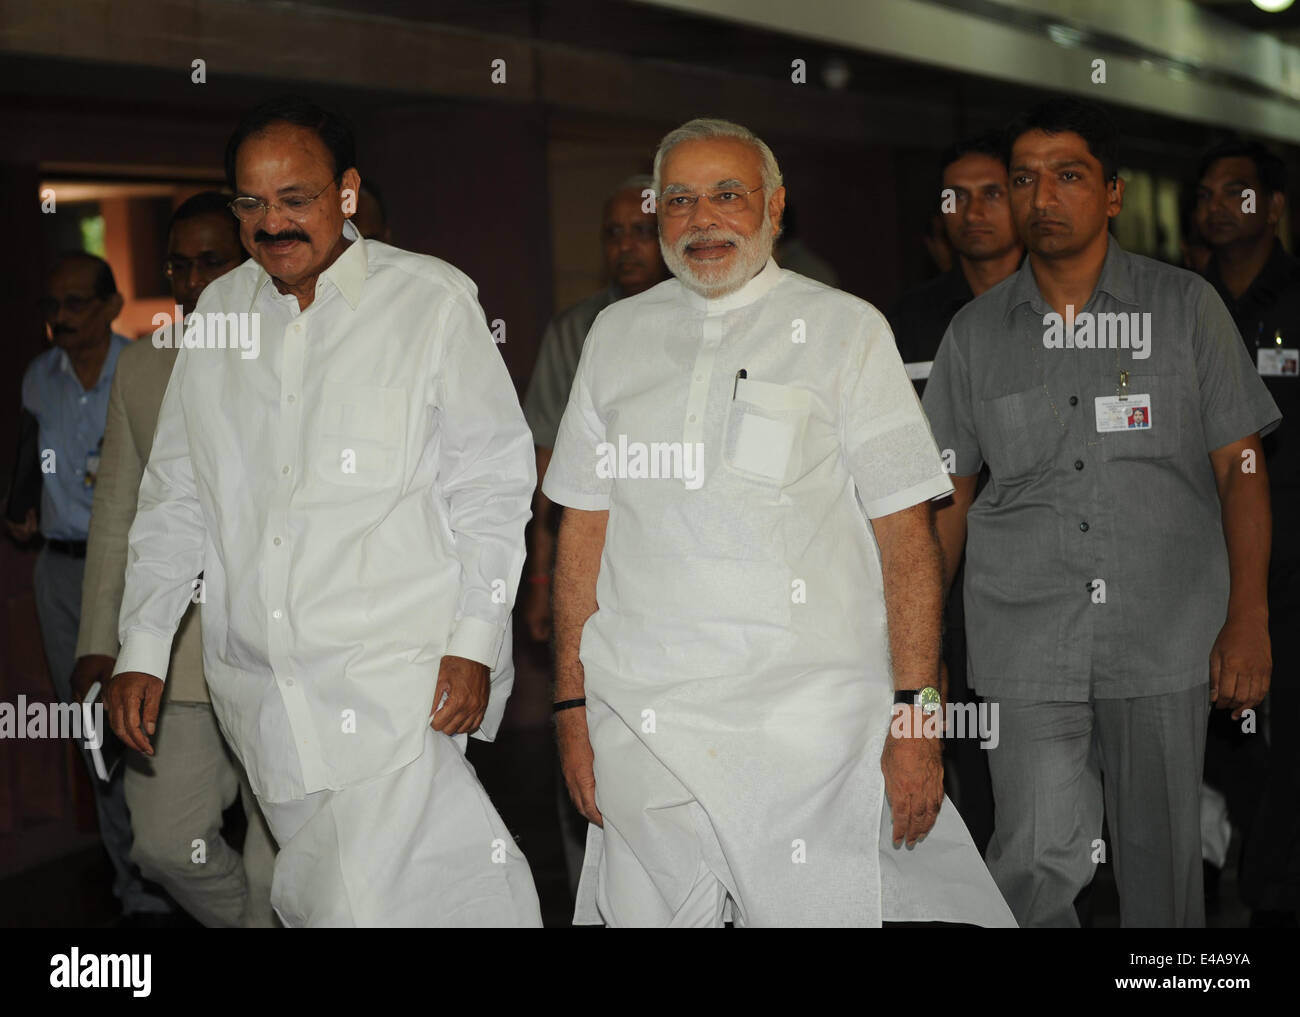 New Delhi, India. 7th July, 2014. Indian Prime Minister Narendra Modi (C) arrives for the commencement of the budget session at the Parliament House in New Delhi, India, July 7, 2014. Credit:  Partha Sarkar/Xinhua/Alamy Live News Stock Photo